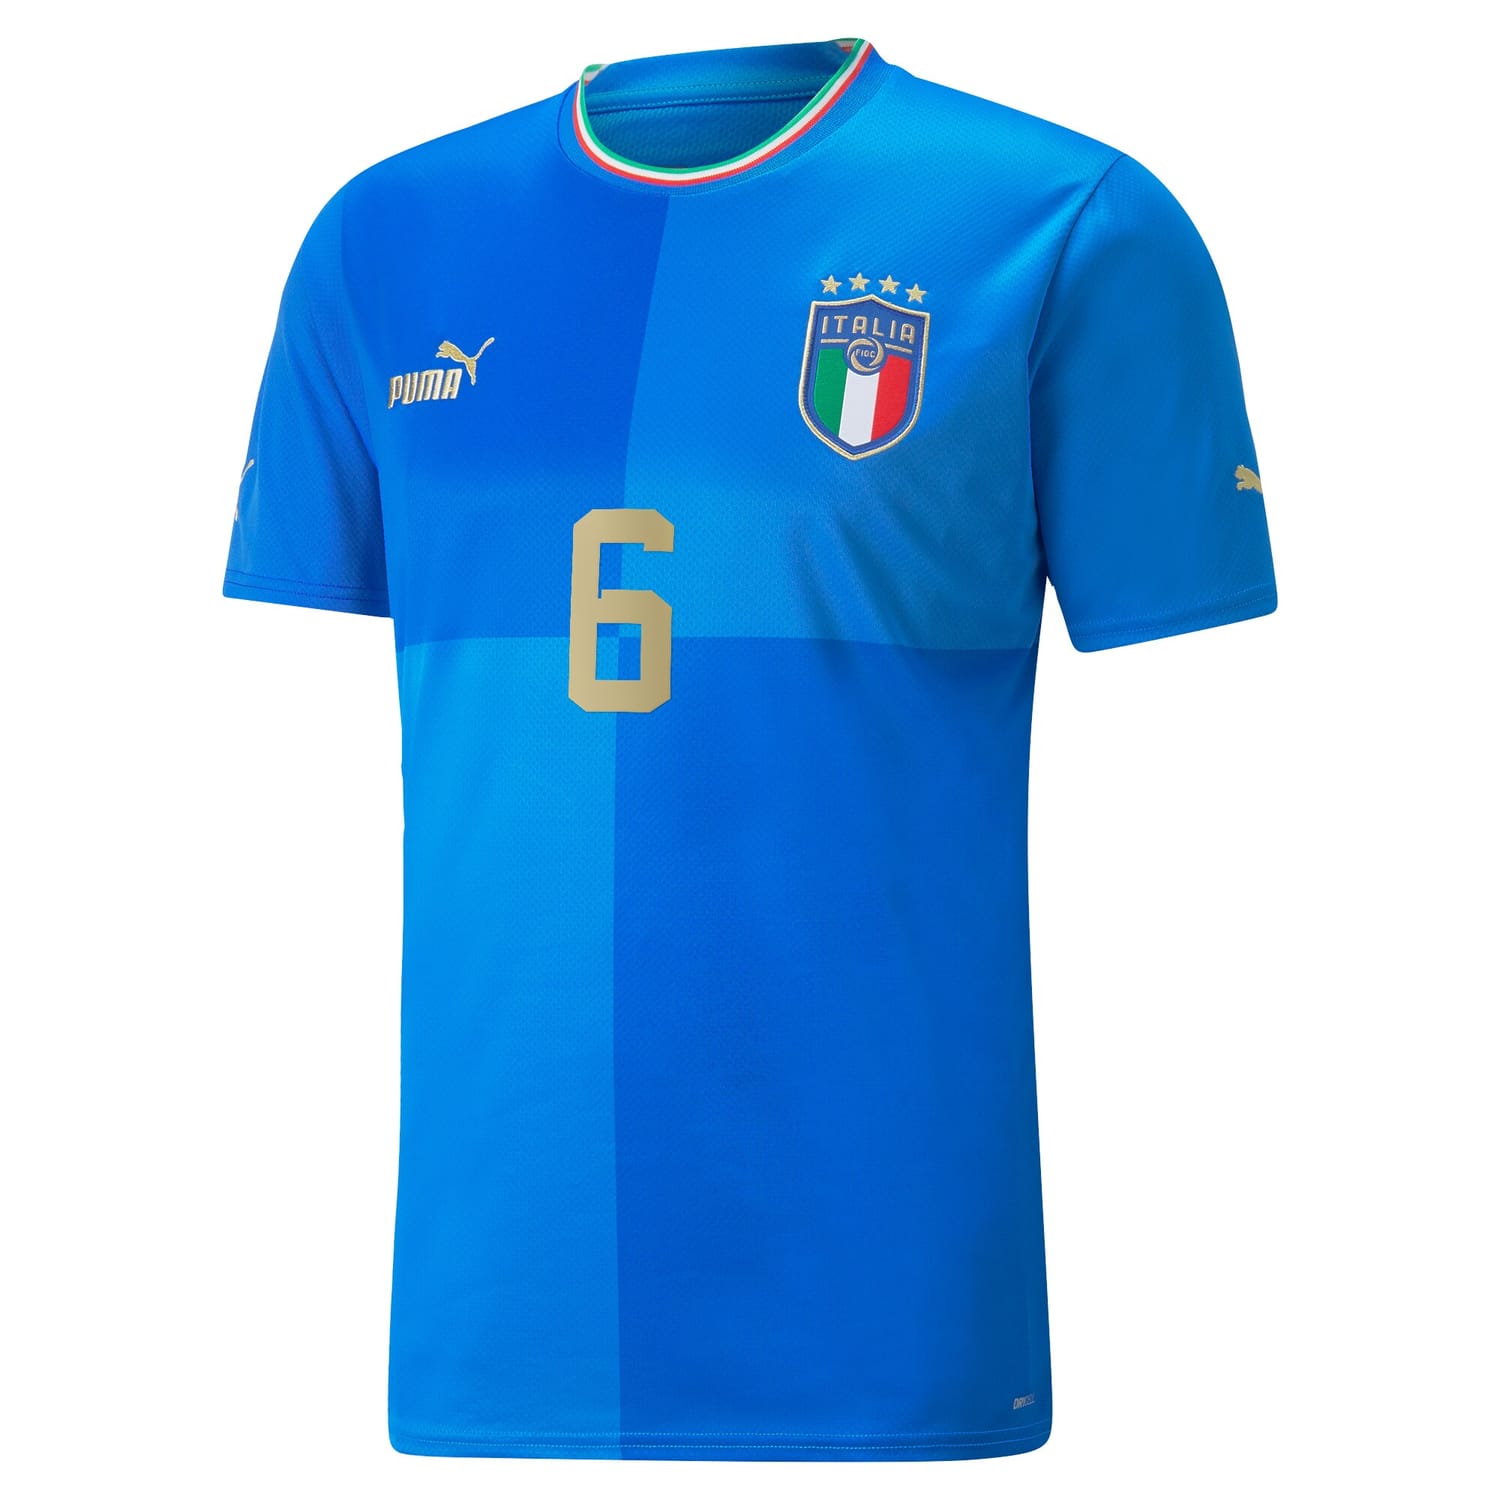 Italy National Team Home Jersey Shirt Blue 2022-23 player Marco Verratti printing for Men